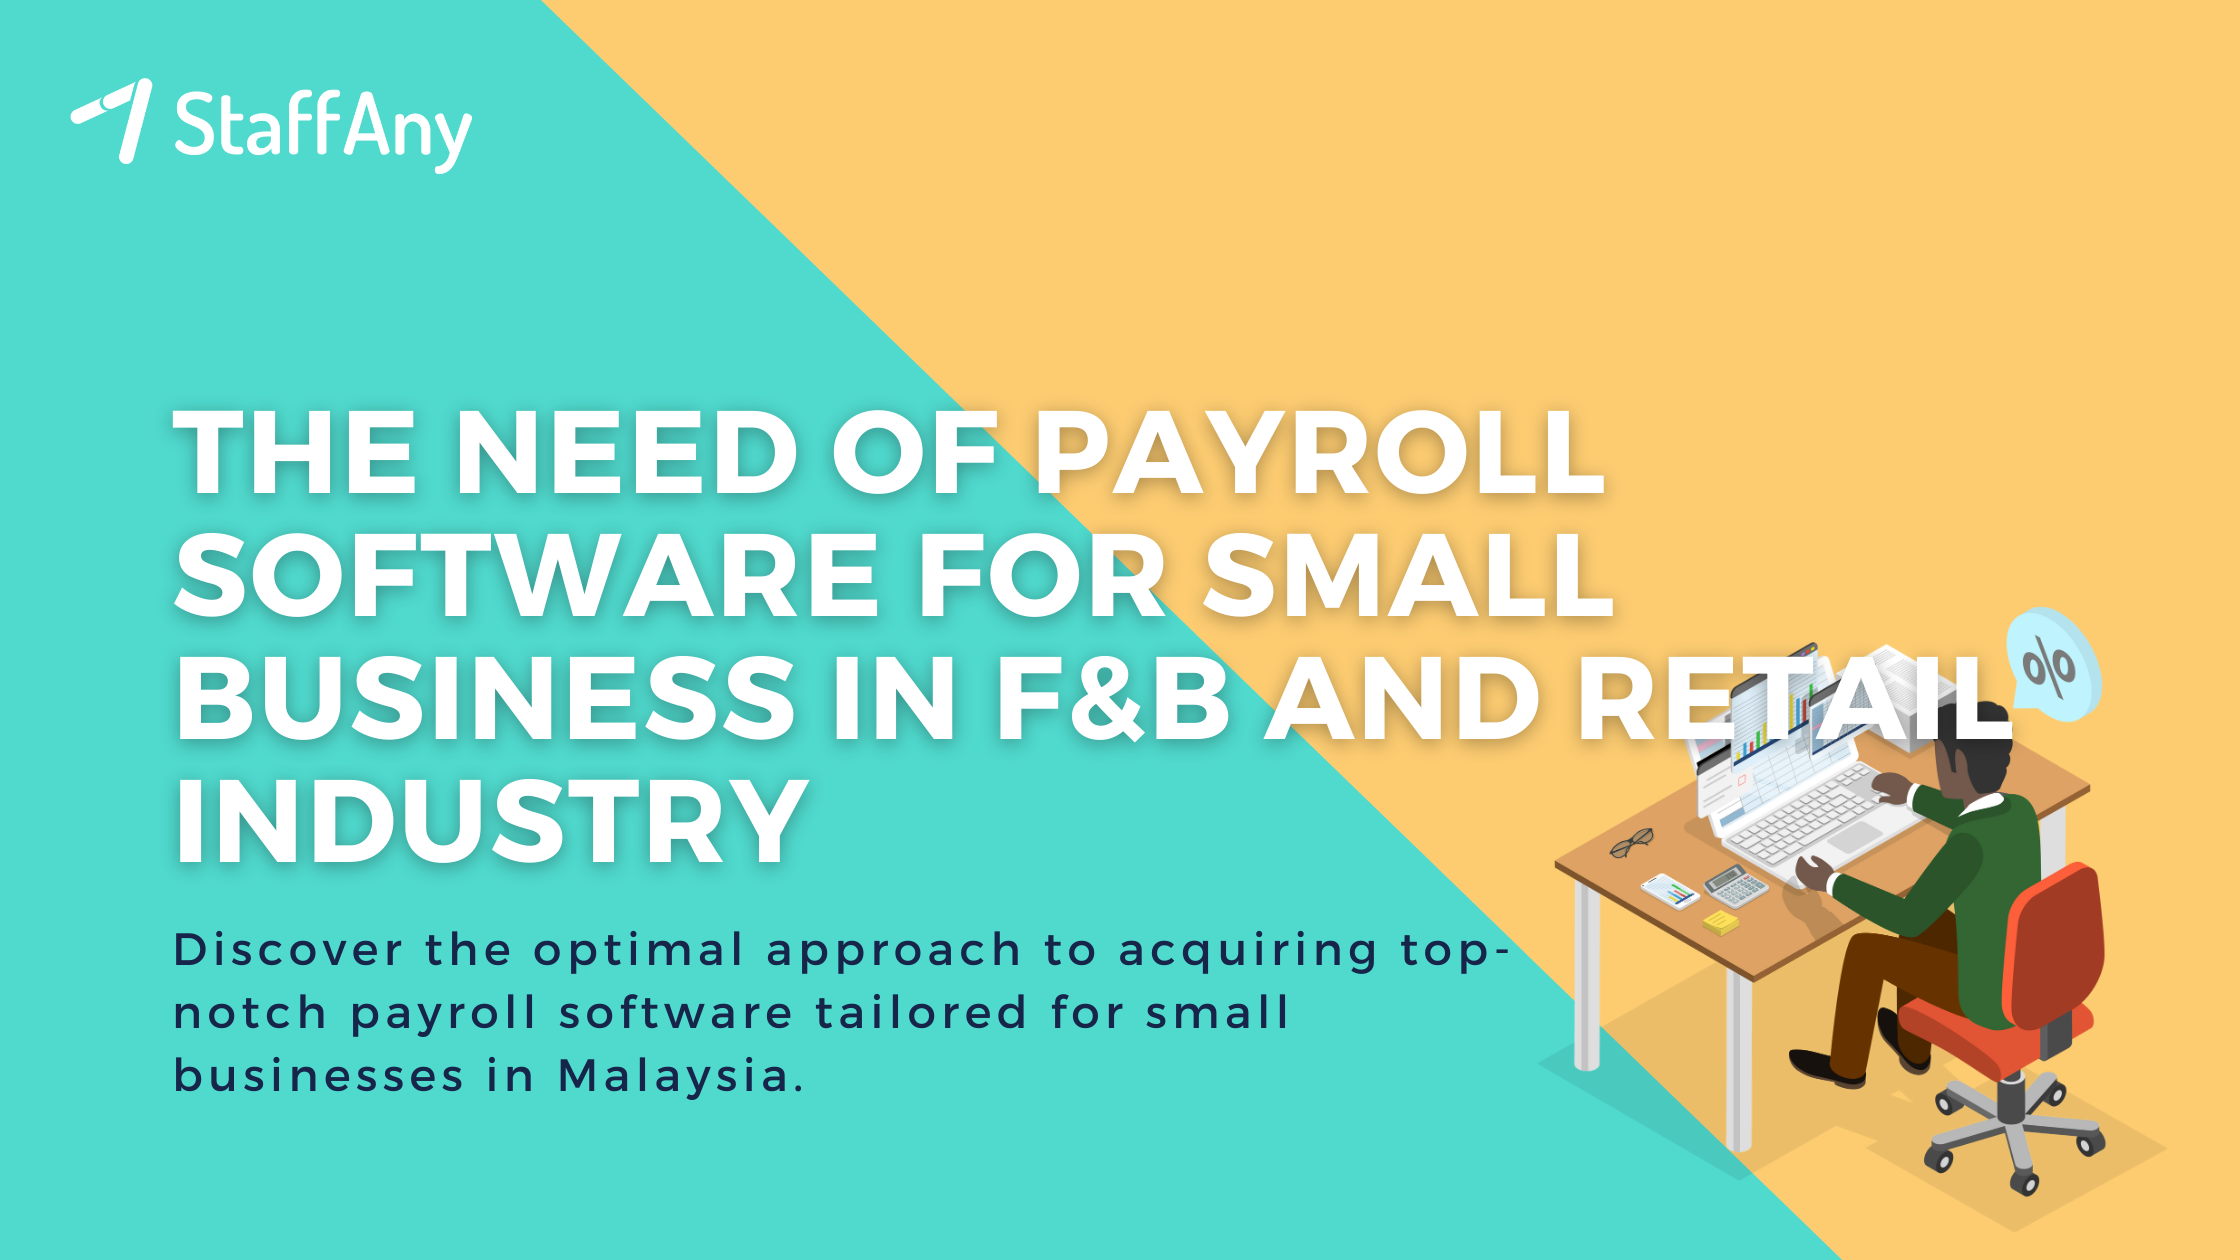 The Need of Payroll Software for Small Business in F&B and Retail Industry